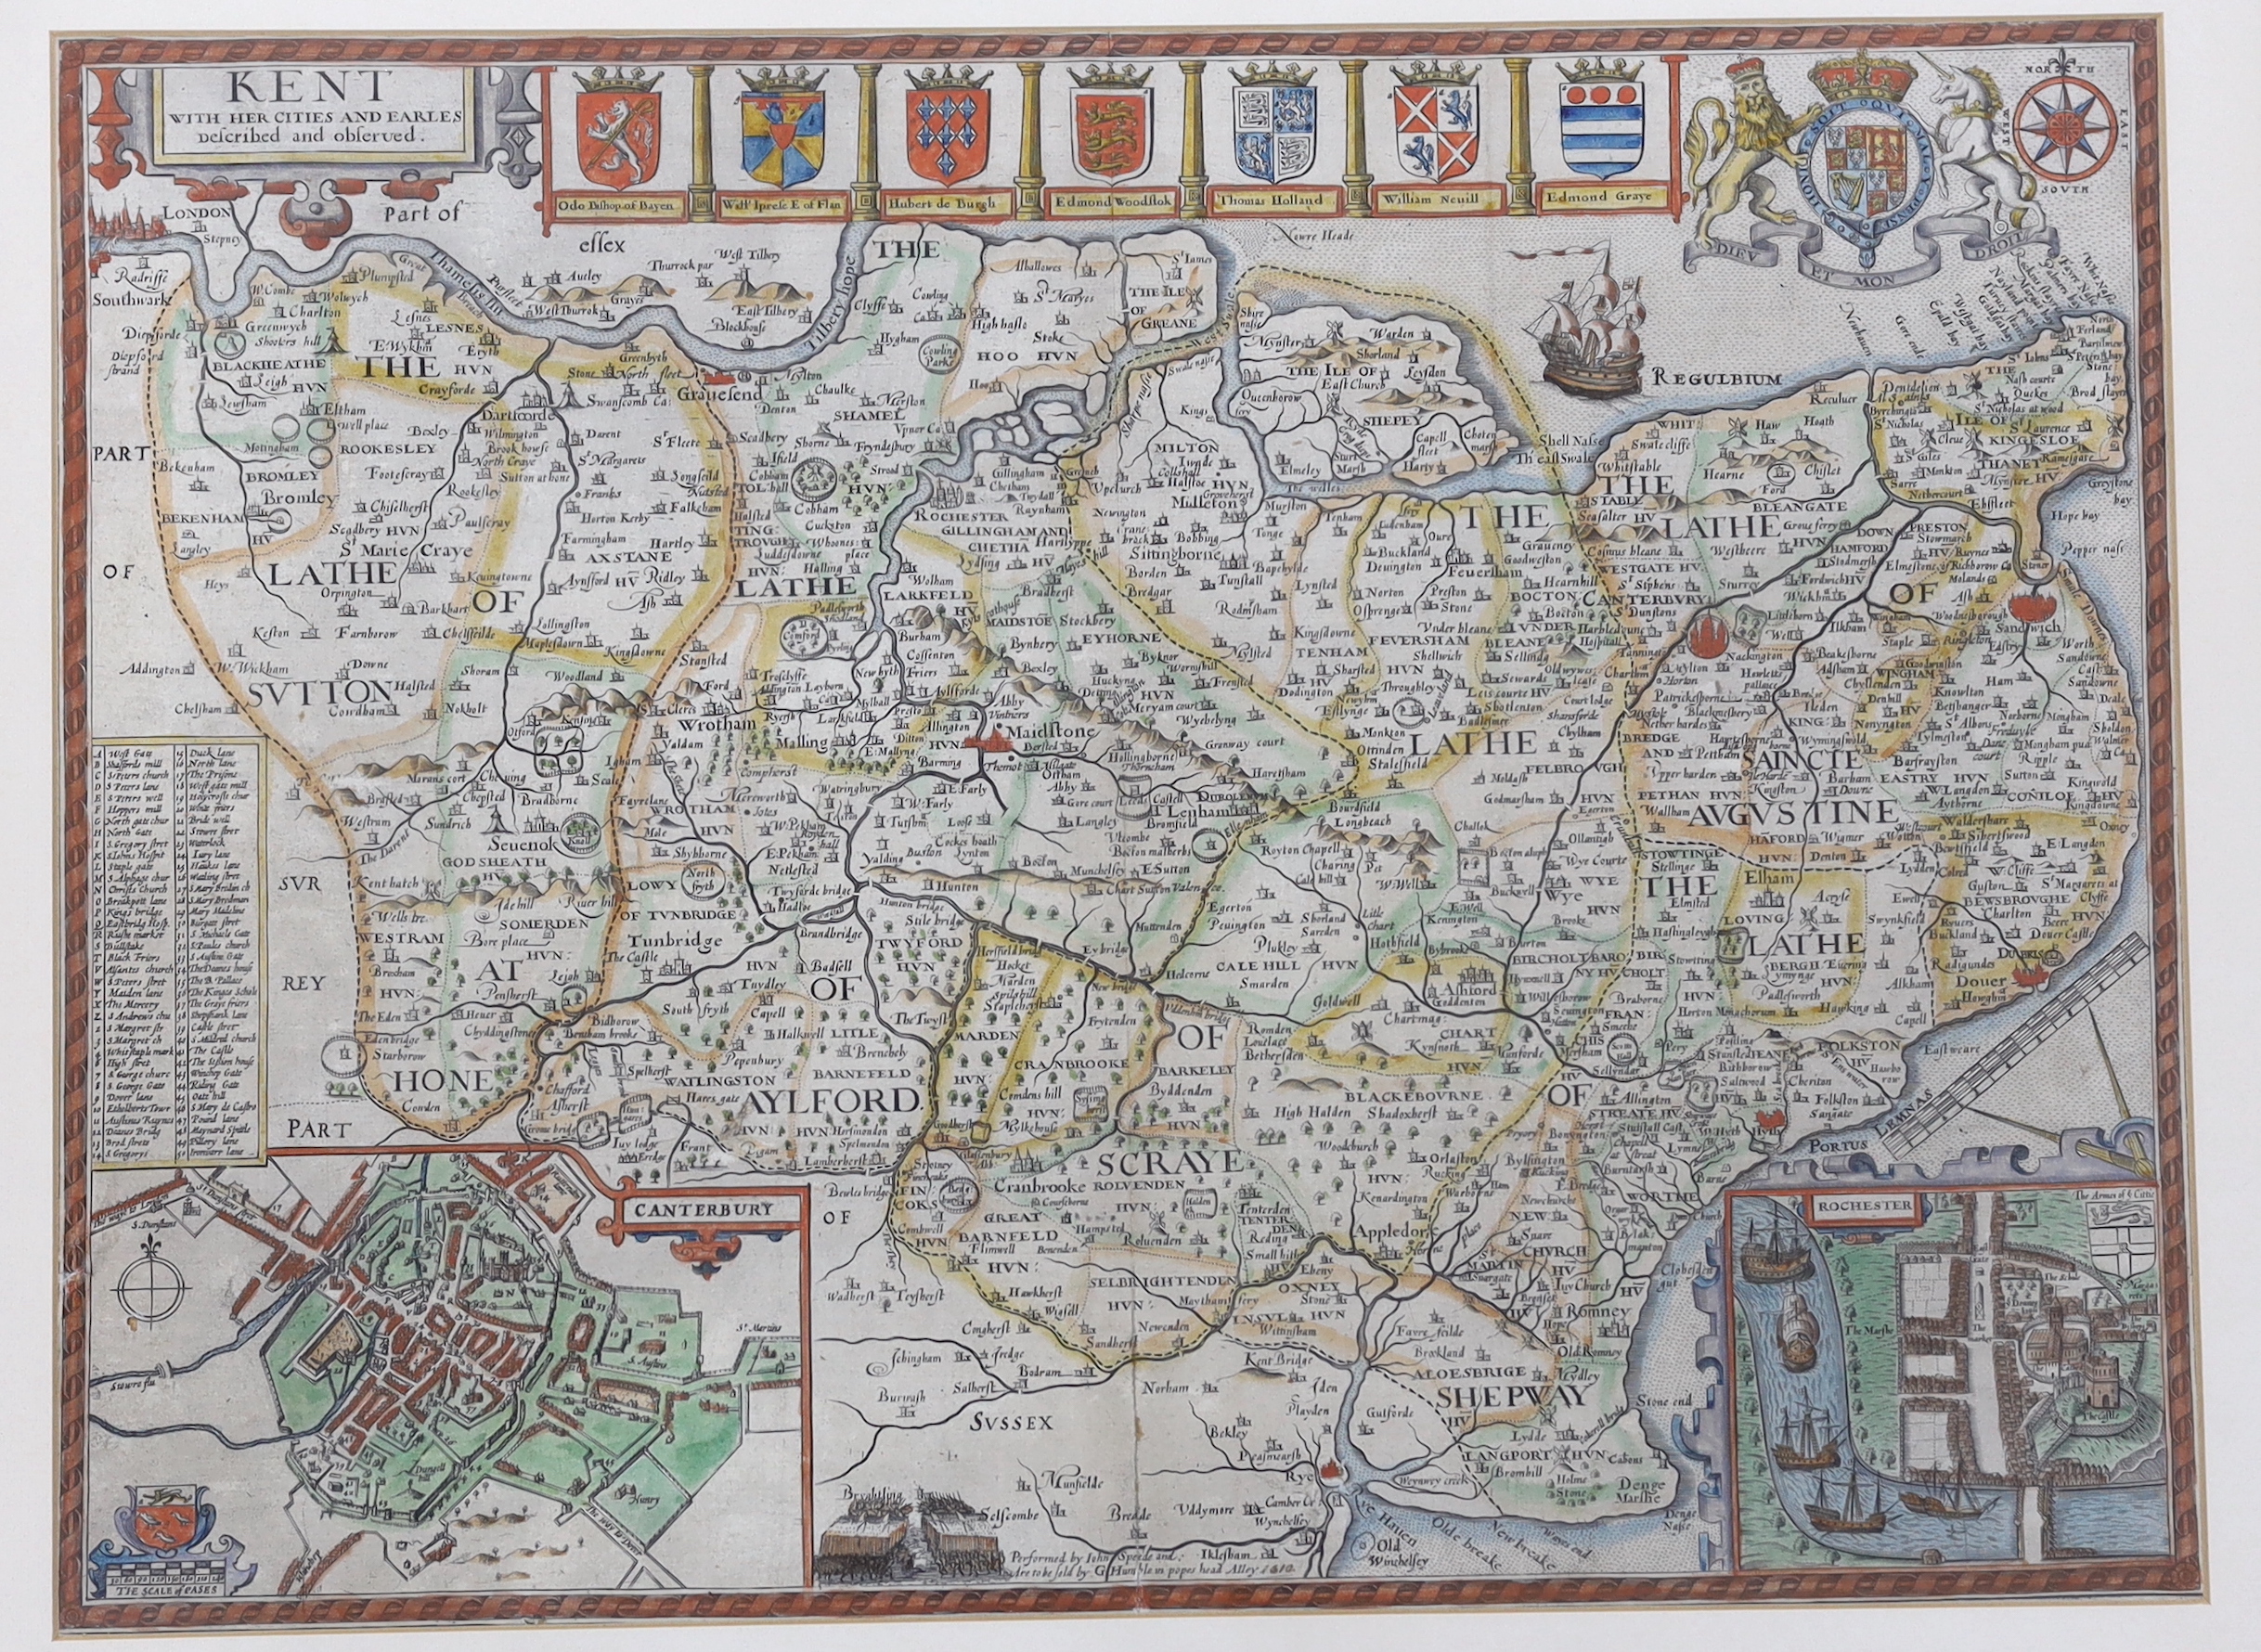 John Speede (1552-1629) Antique hand coloured Map of Kent with her Cities and Earles, publ. G. Humble, The Parker Gallery label verso, 49 x 37cm